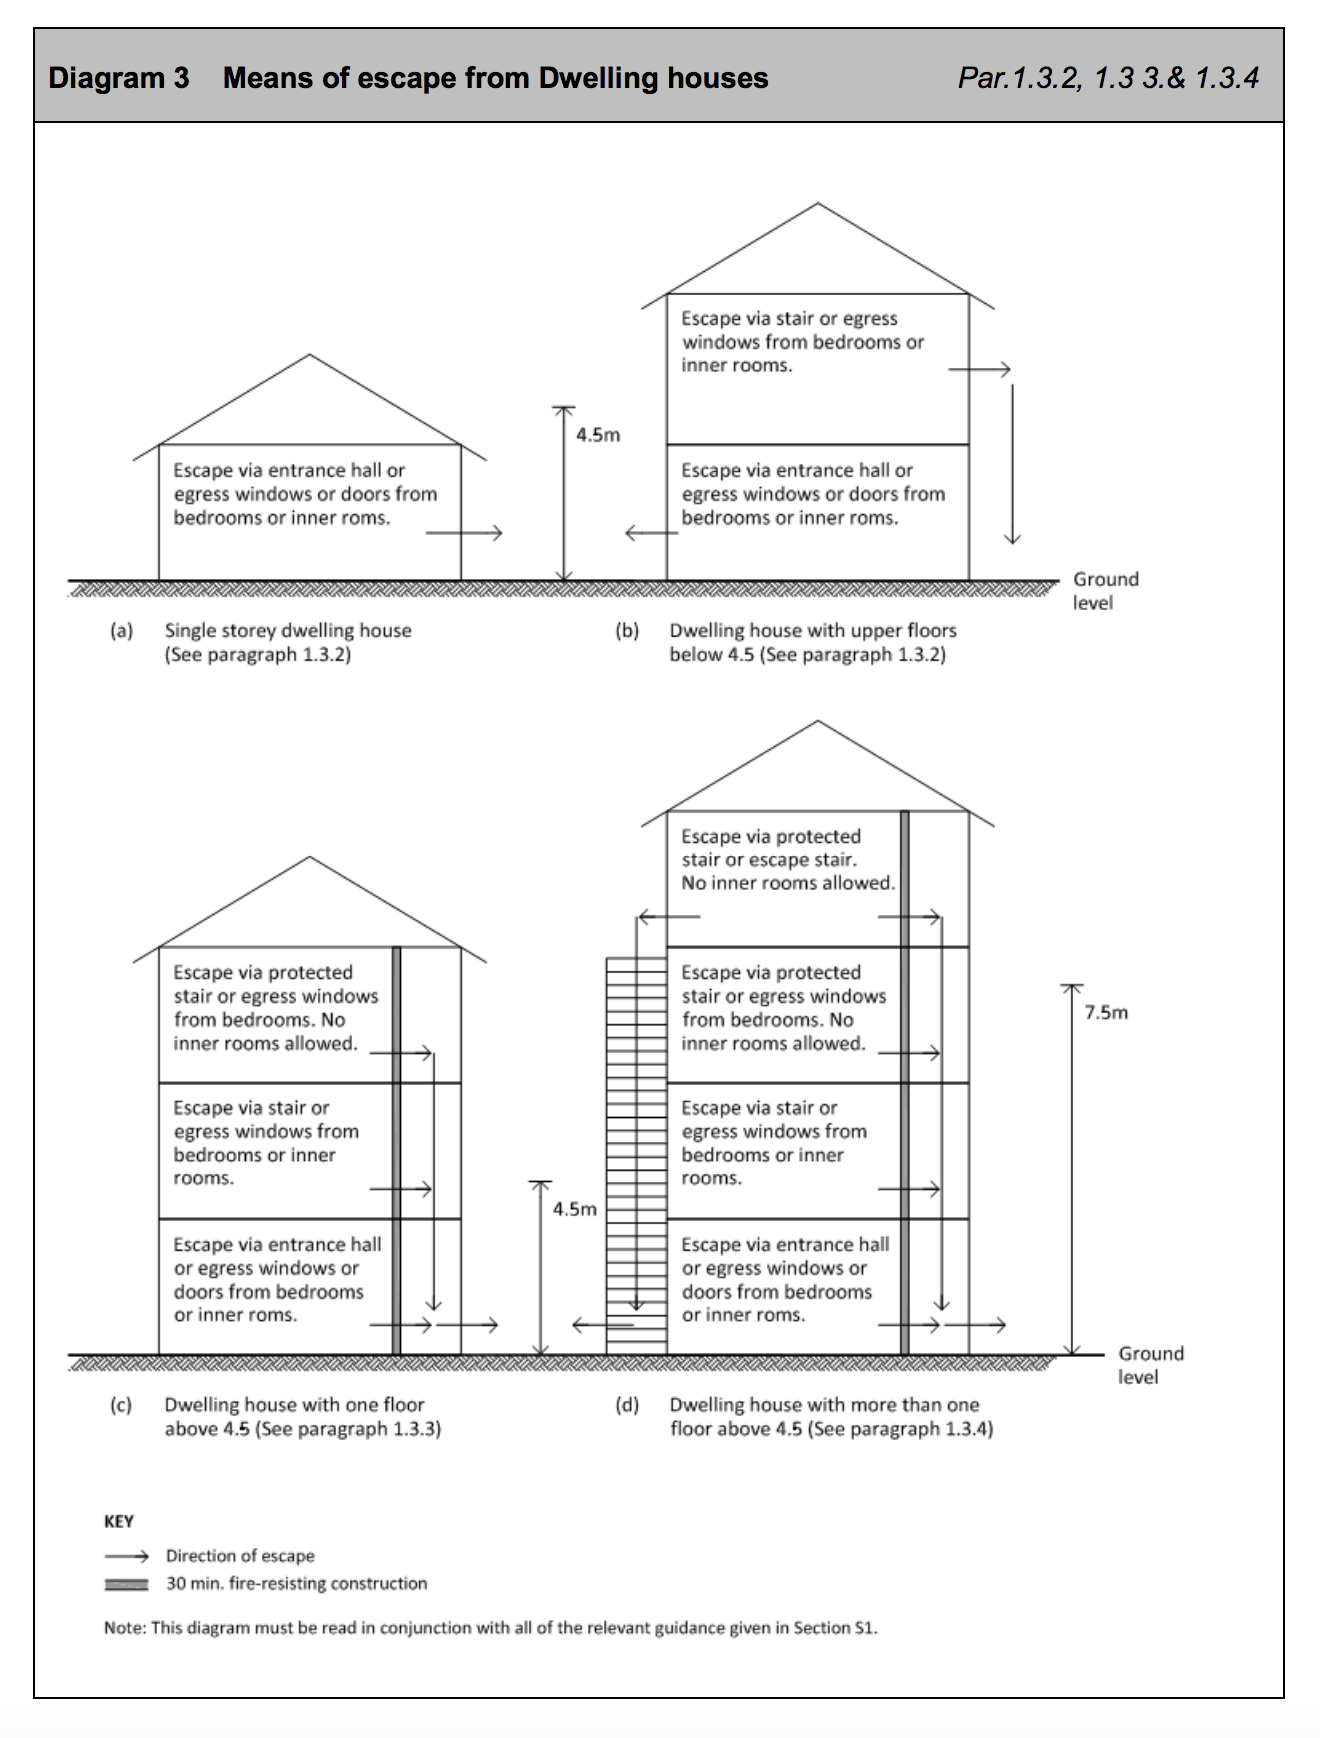 Diagram HB3 - Means of escape from dwelling houses - Extract from TGD B Vol. 2